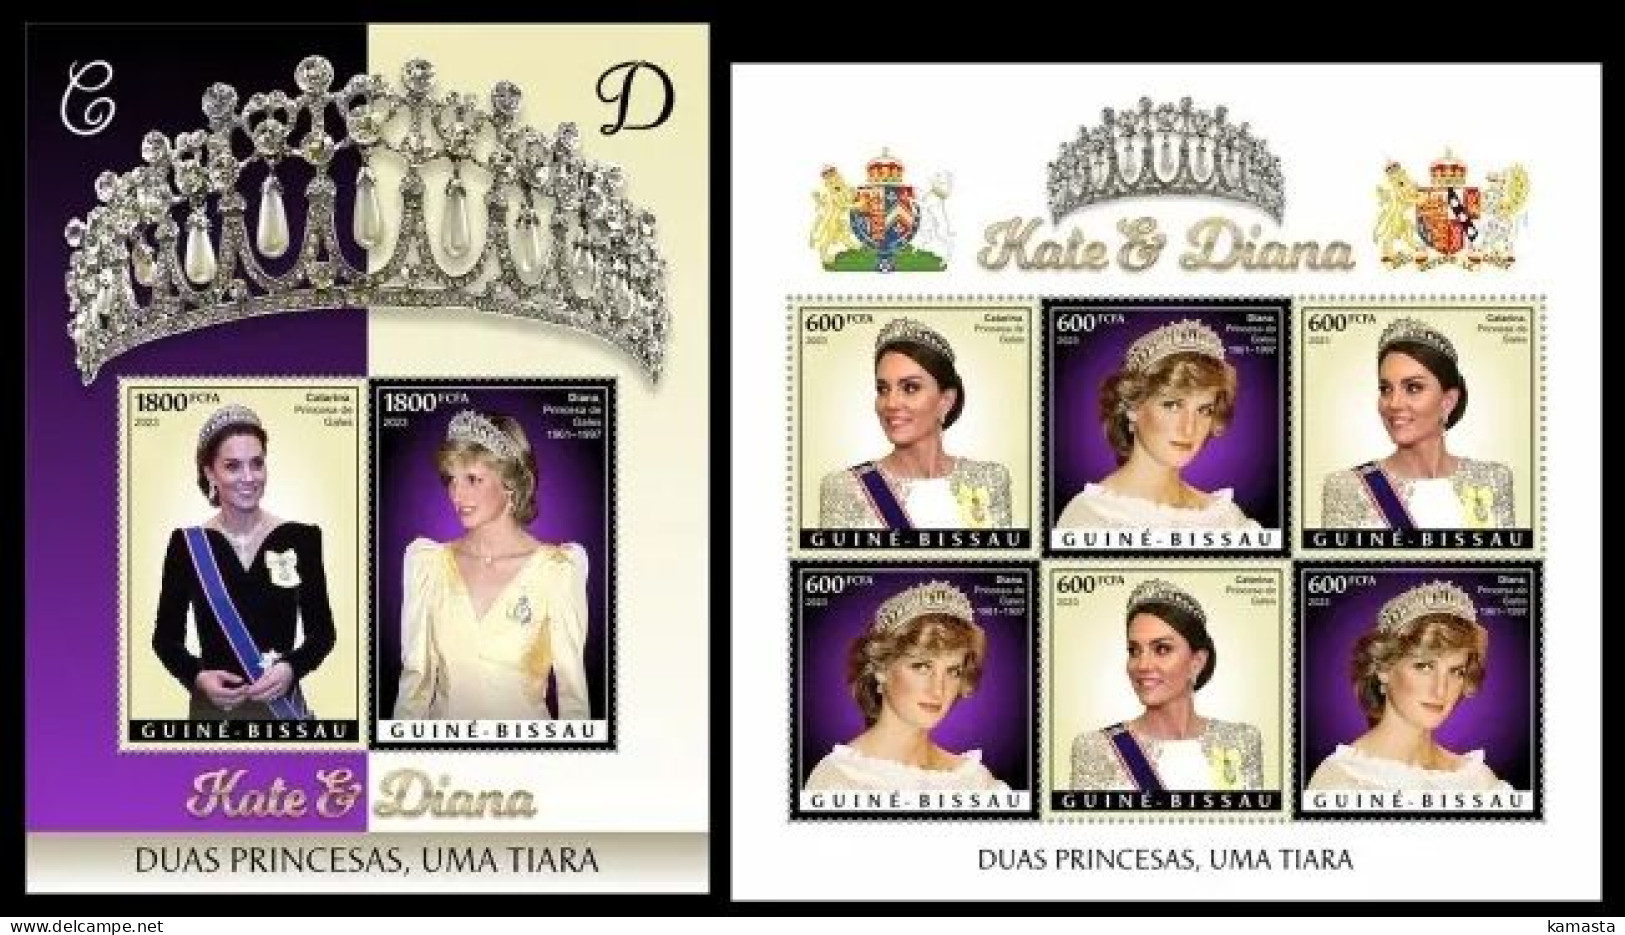 Guinea Bissau 2023 Kate & Diana. (633) OFFICIAL ISSUE - Familles Royales